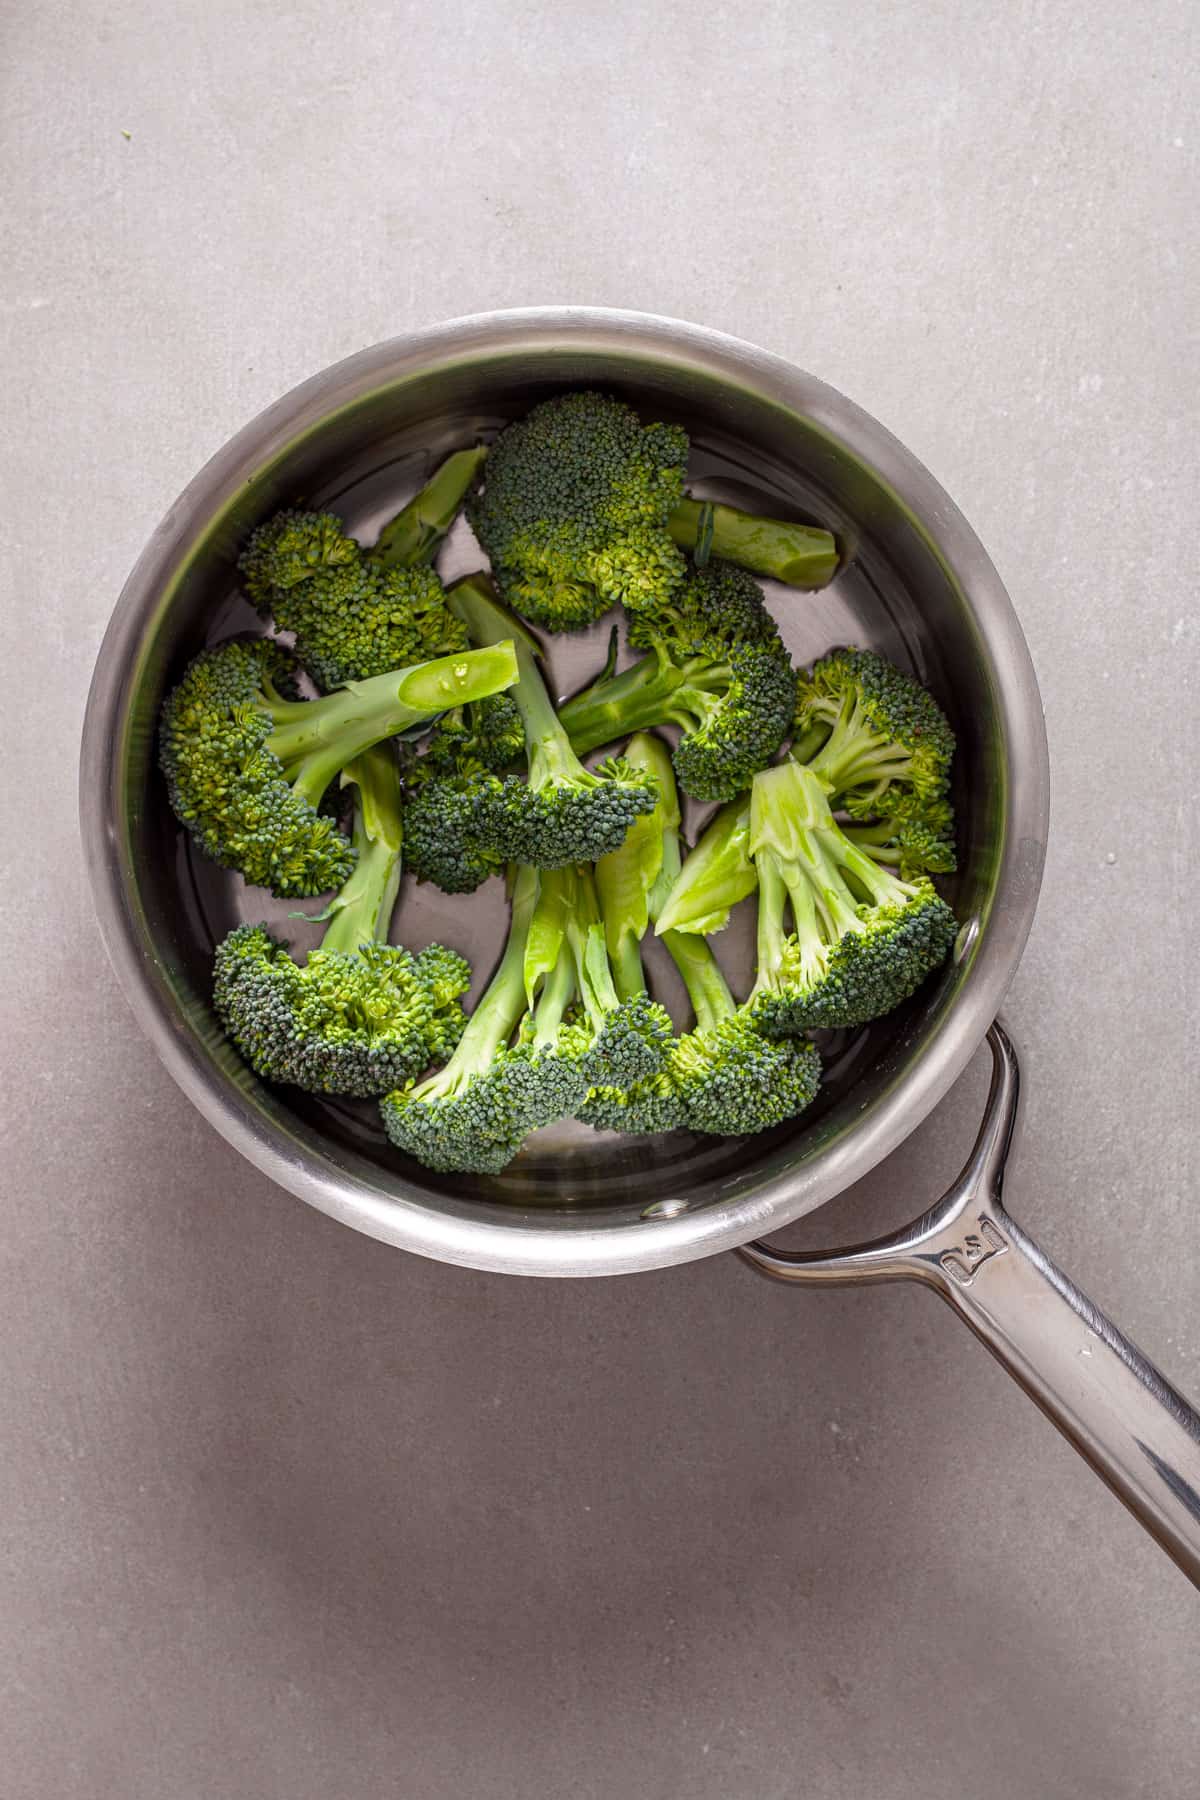 Broccoli florets in a pot ready to get steamed.